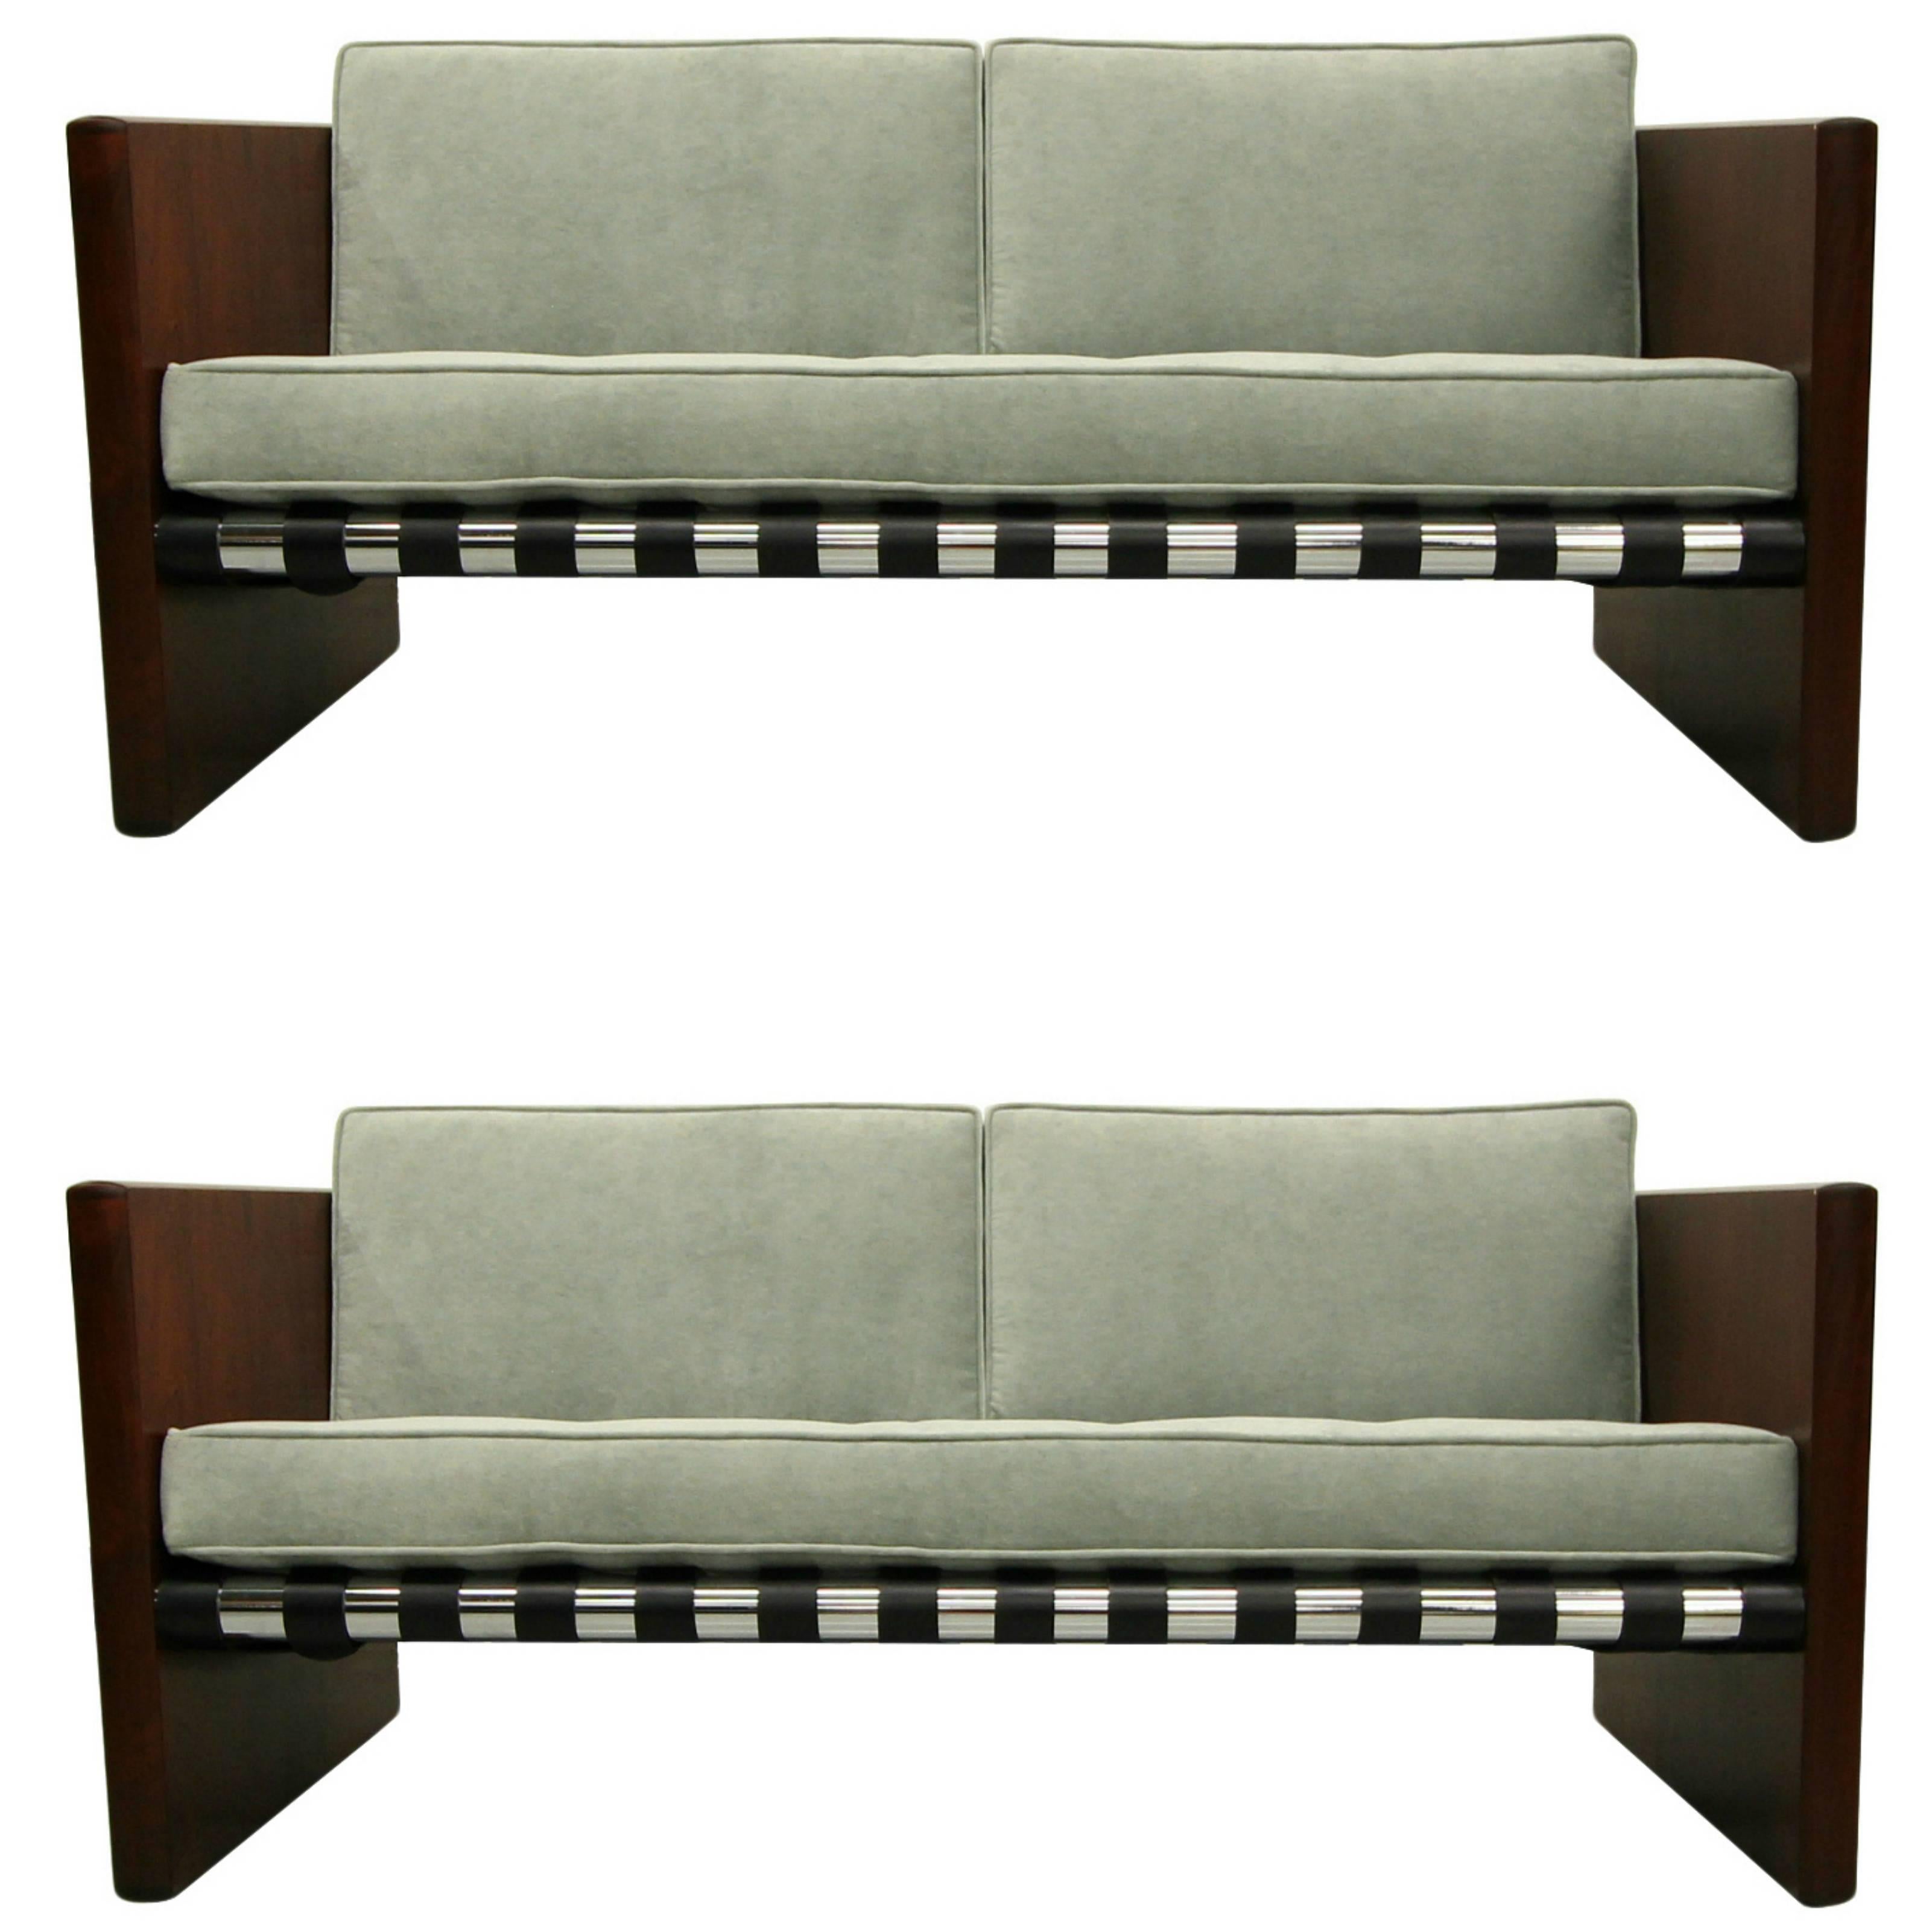 Pair of Mid-Century Danish Rosewood Chrome and Leather Sling Sofas